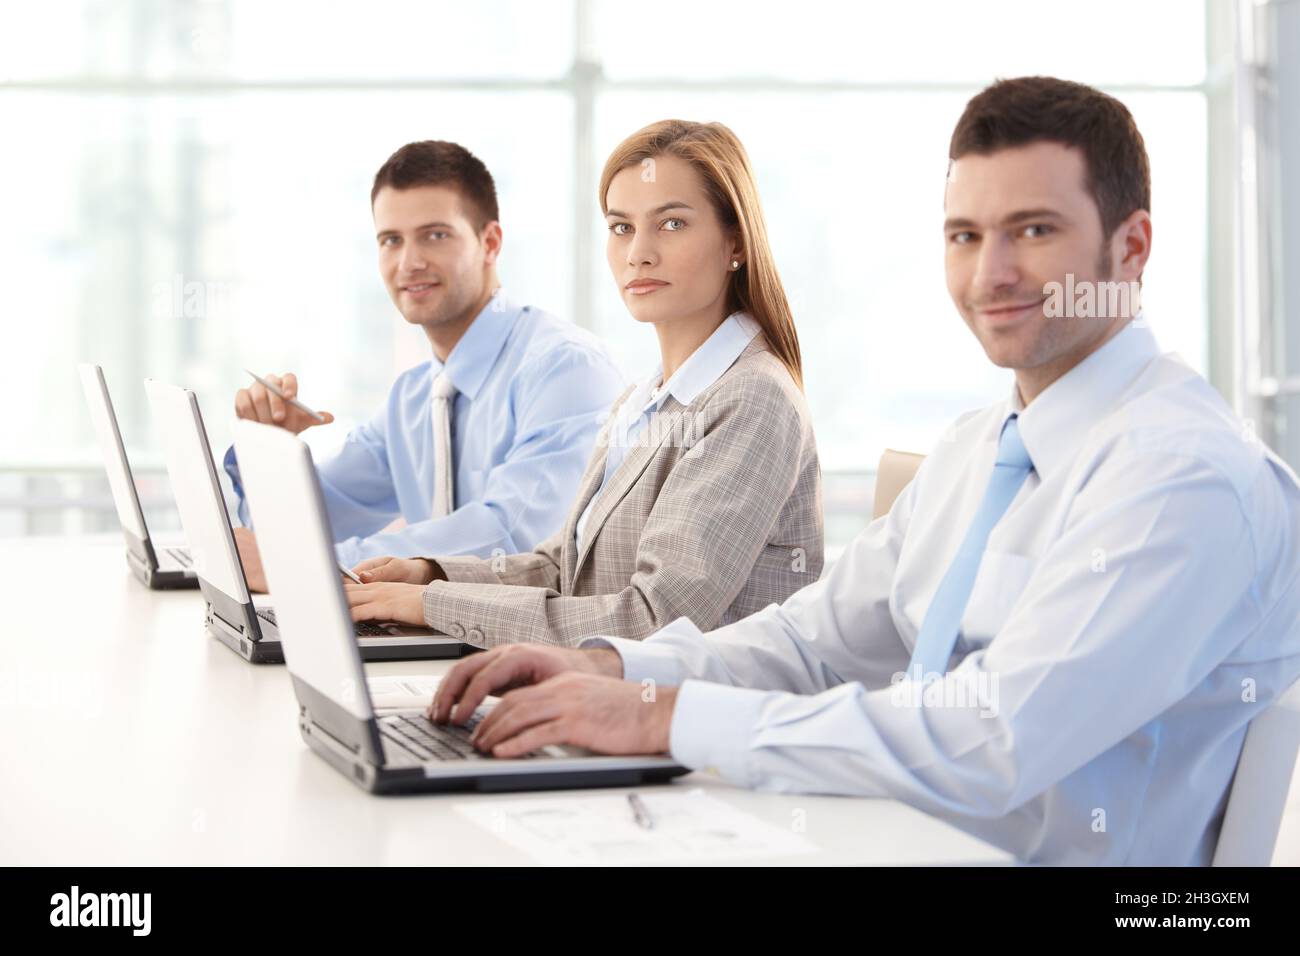 Young businesspeople working on laptop smiling Stock Photo